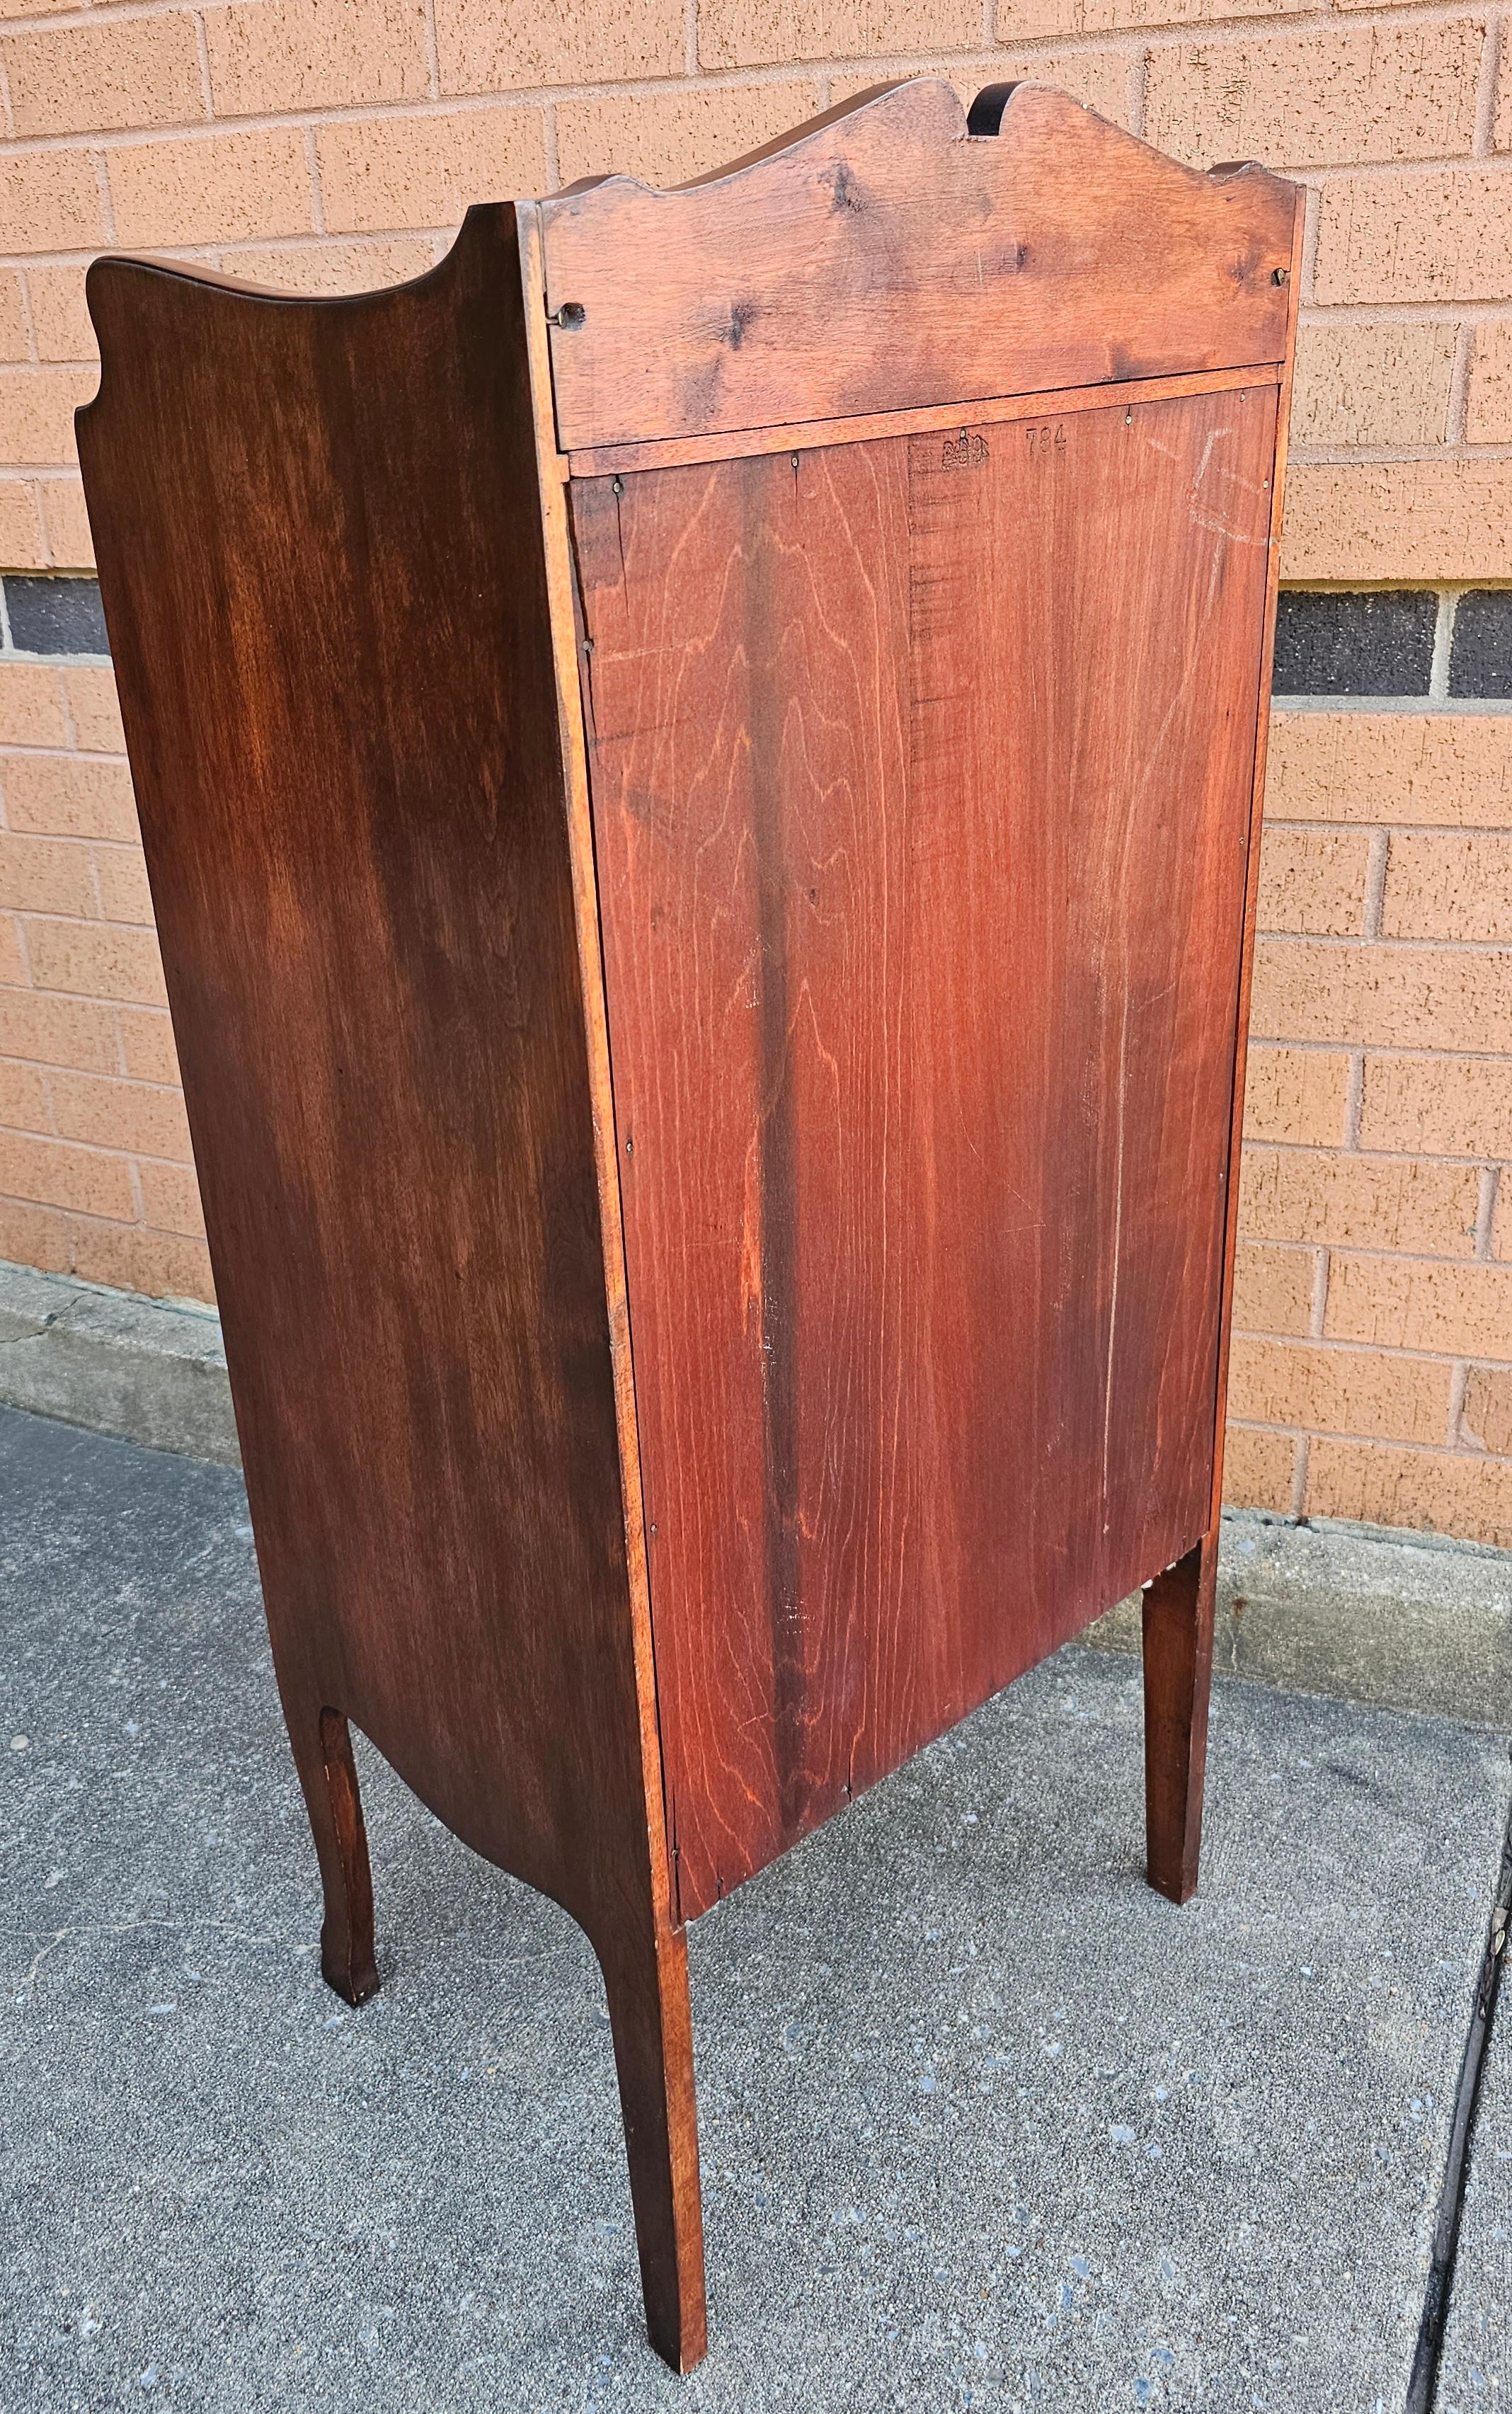 1930s Refinished Edwardian Mahogany and Satinwood Inlaid Sheet Music Cabinet For Sale 8